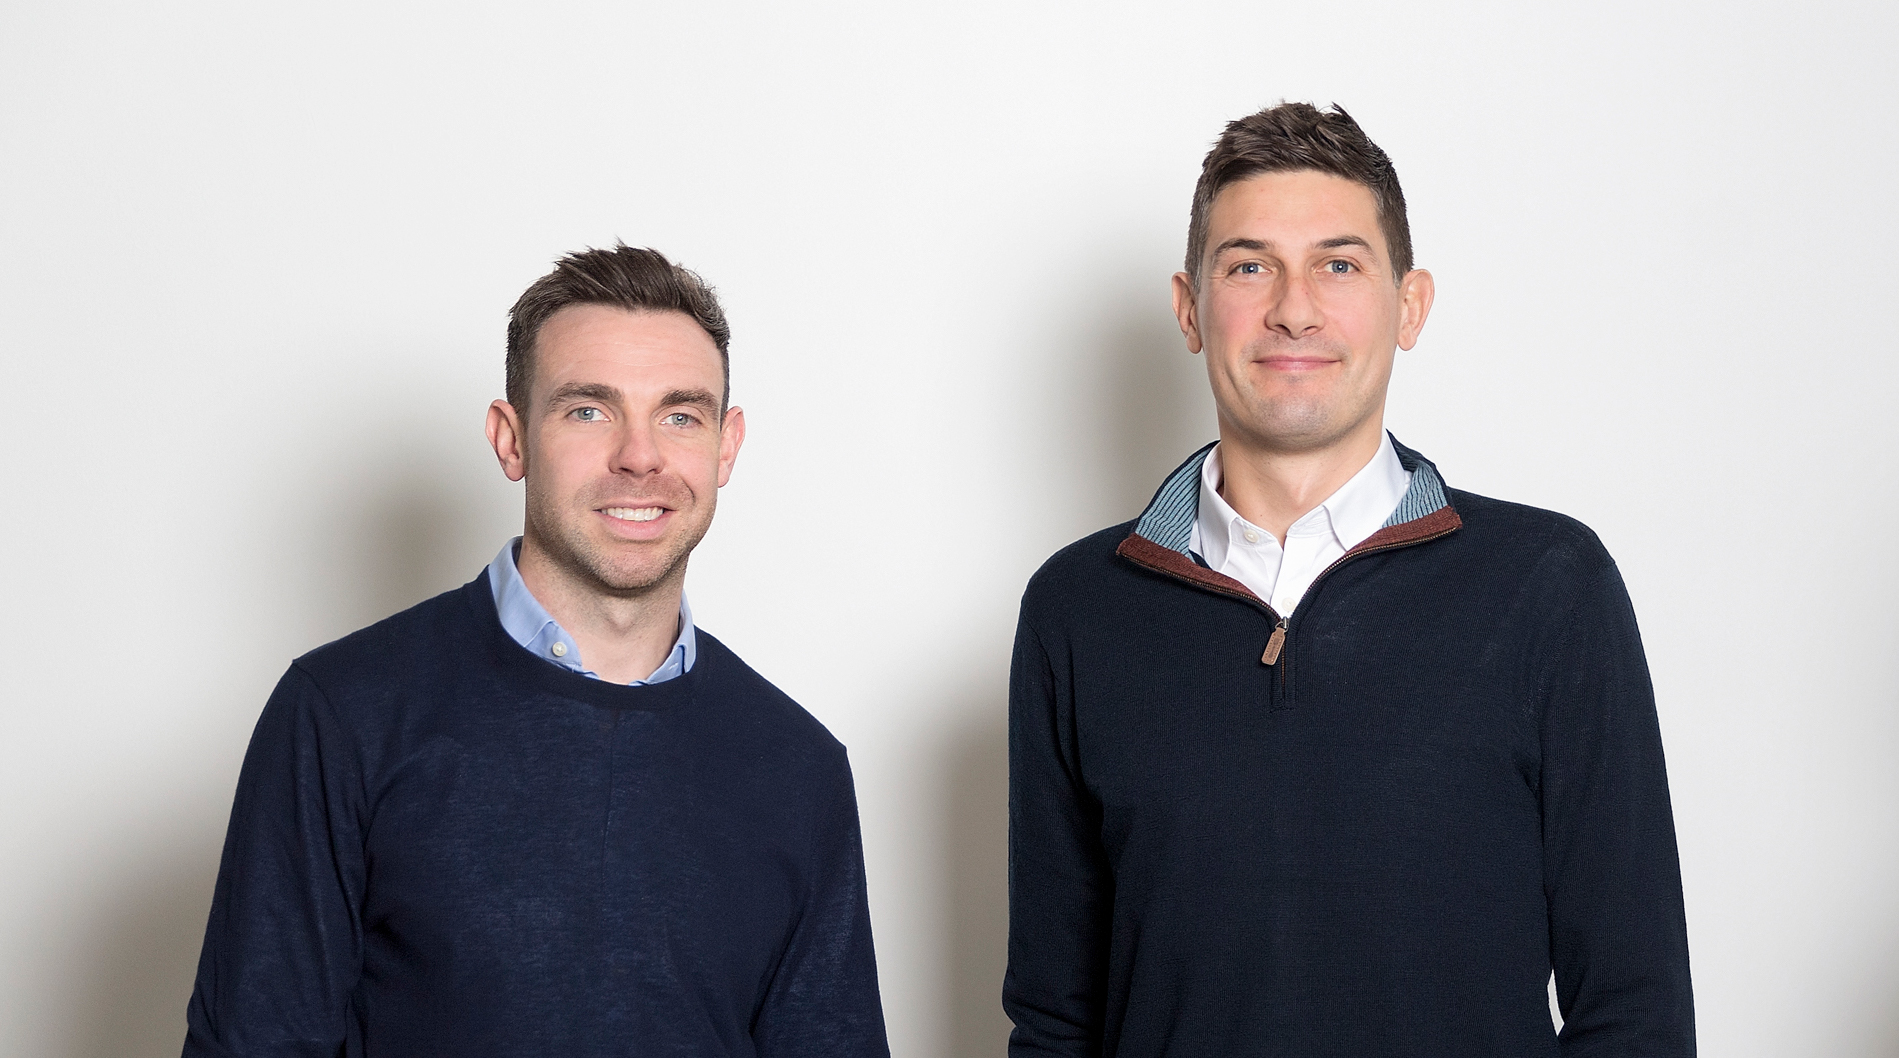 Epiphany Co-founder Robin Skidmore Invests £500k in New Ad Agency